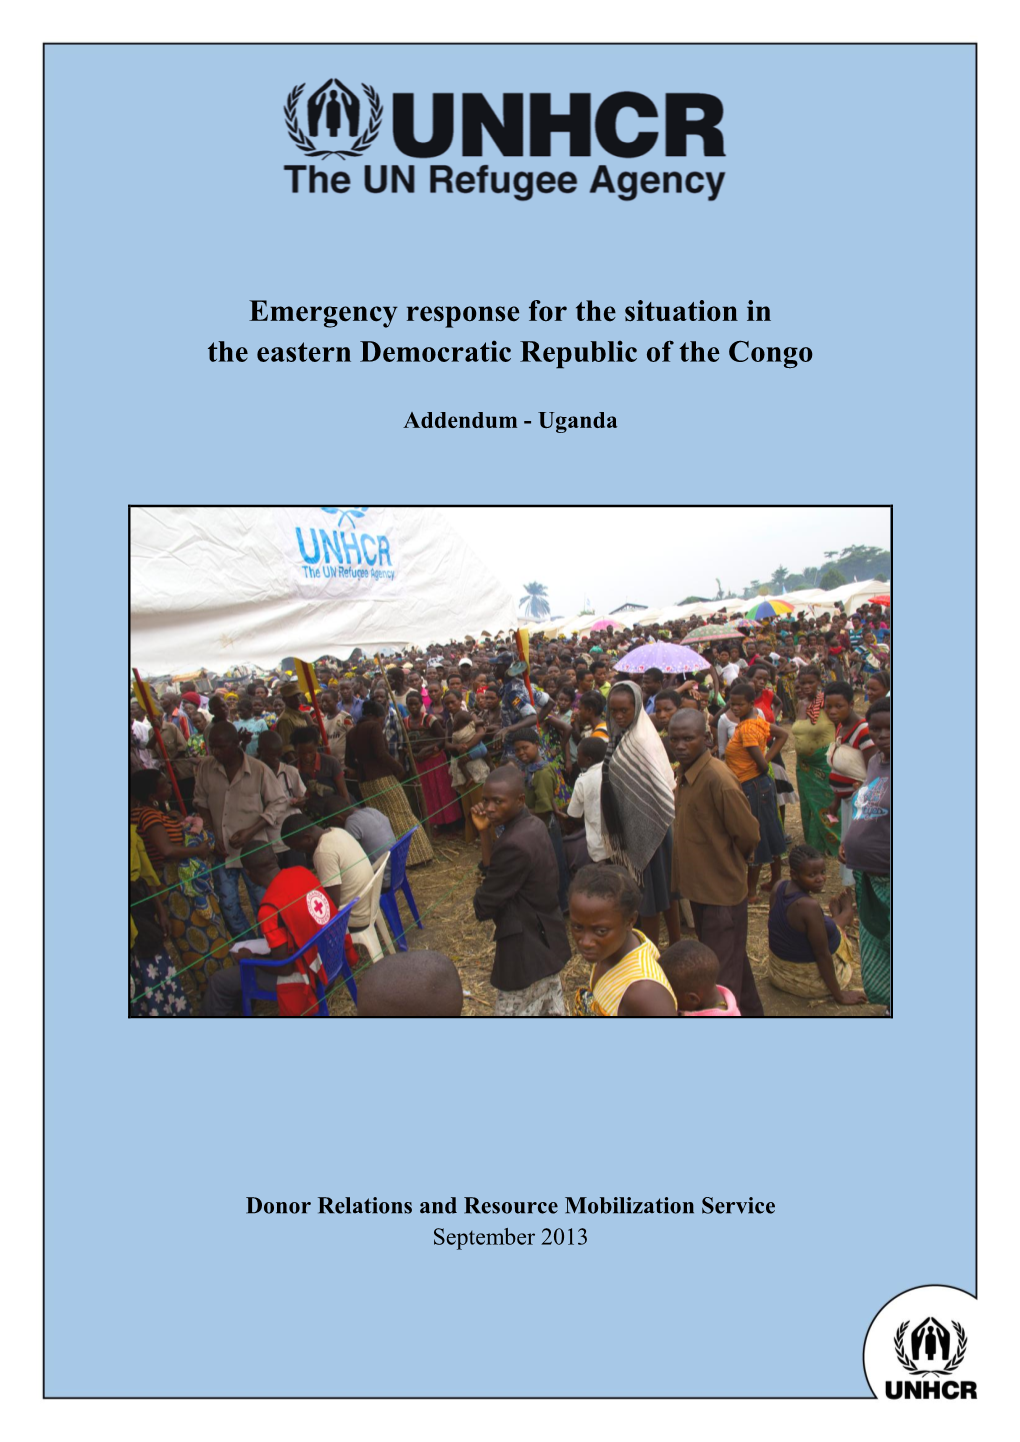 Emergency Response for the Situation in the Eastern Democratic Republic of the Congo